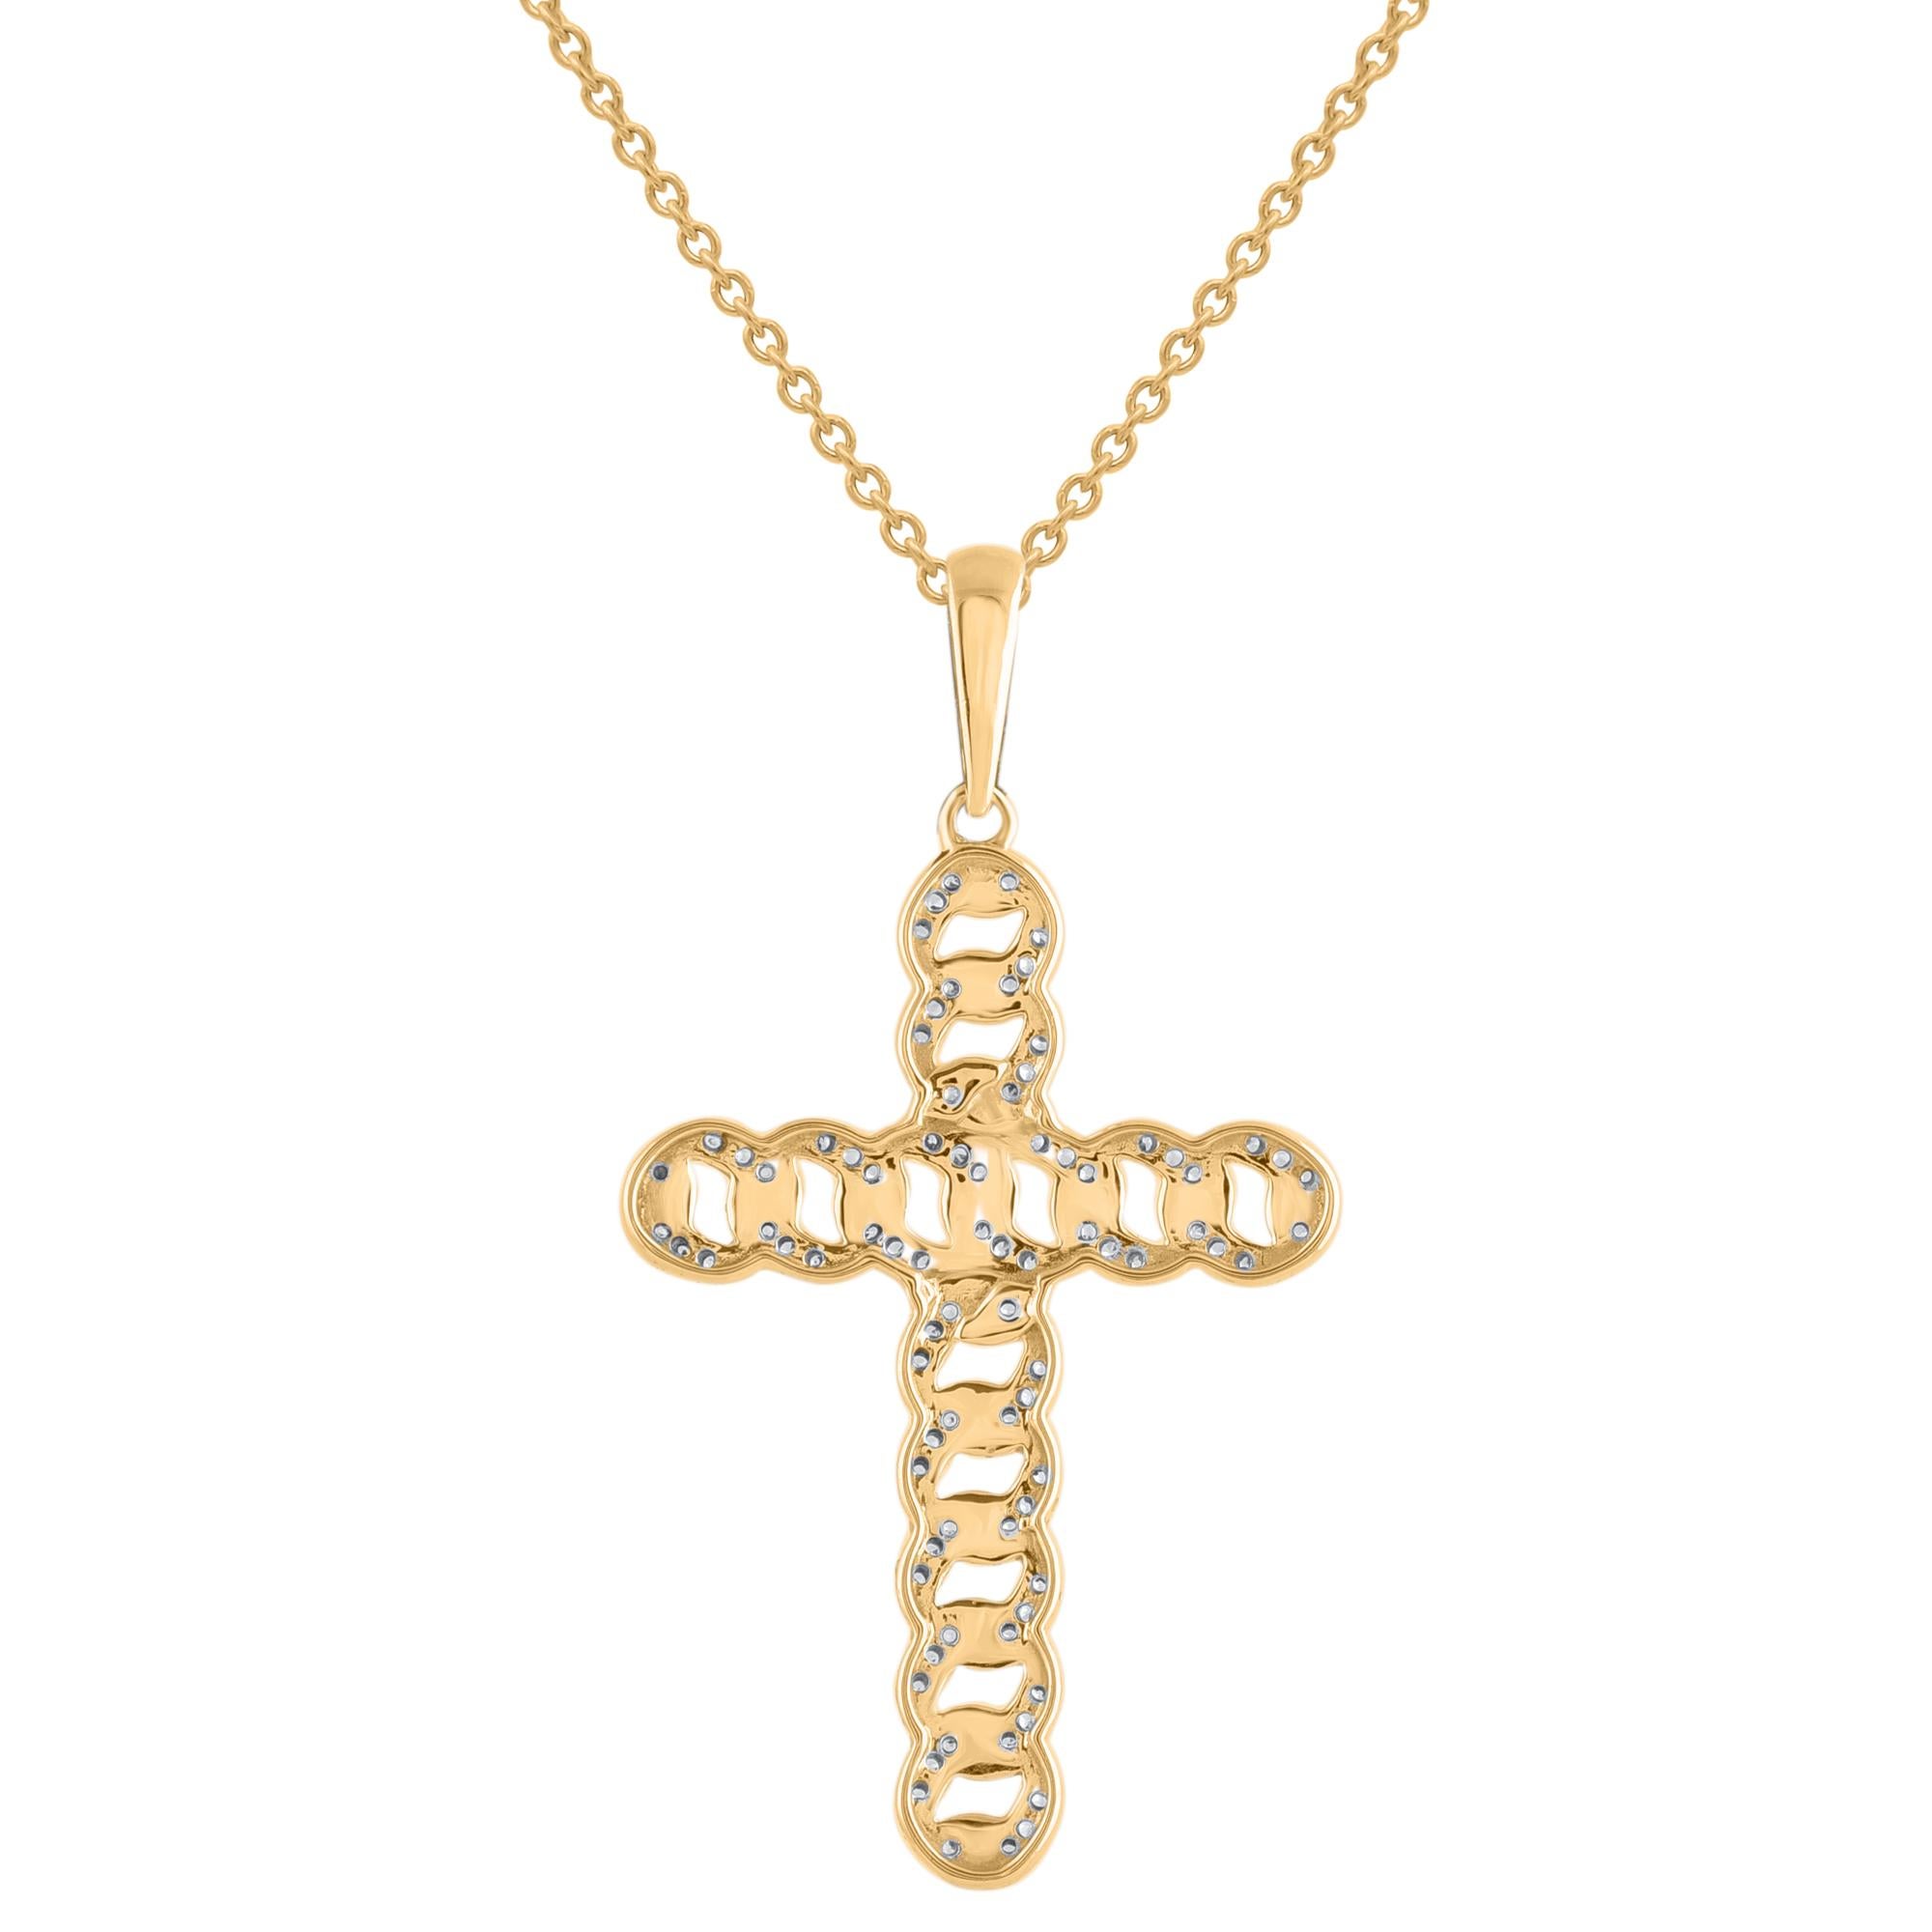 Modern TJD 0.20 Carat Round Cut Diamond Cross Pendant Necklace in 18KT Yellow Gold For Sale